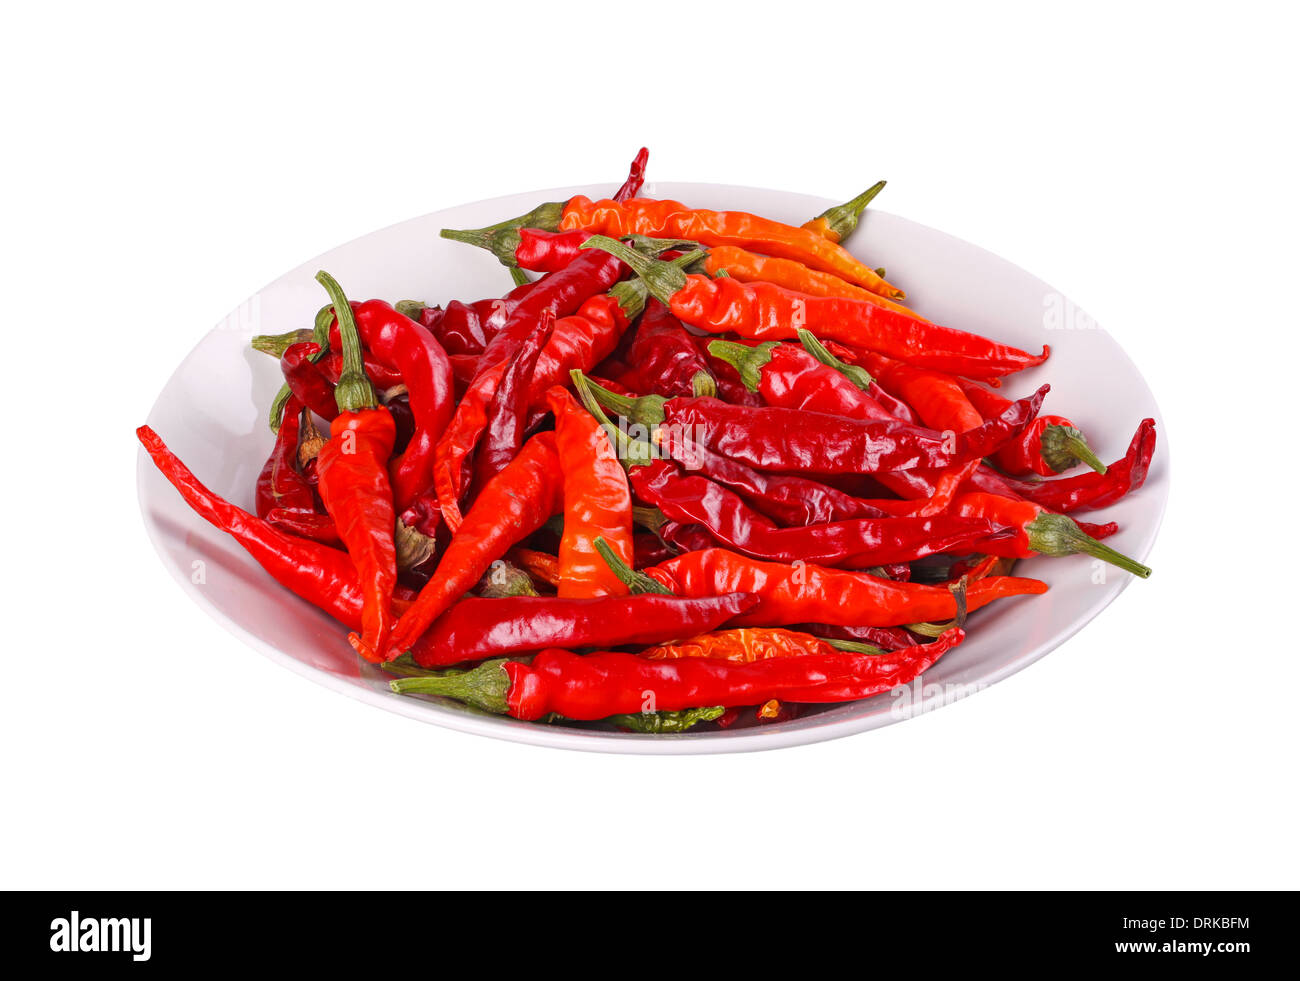 Bowl full of hot, red cayenne chili peppers (Capsicum annuum) isolated against a white background Stock Photo